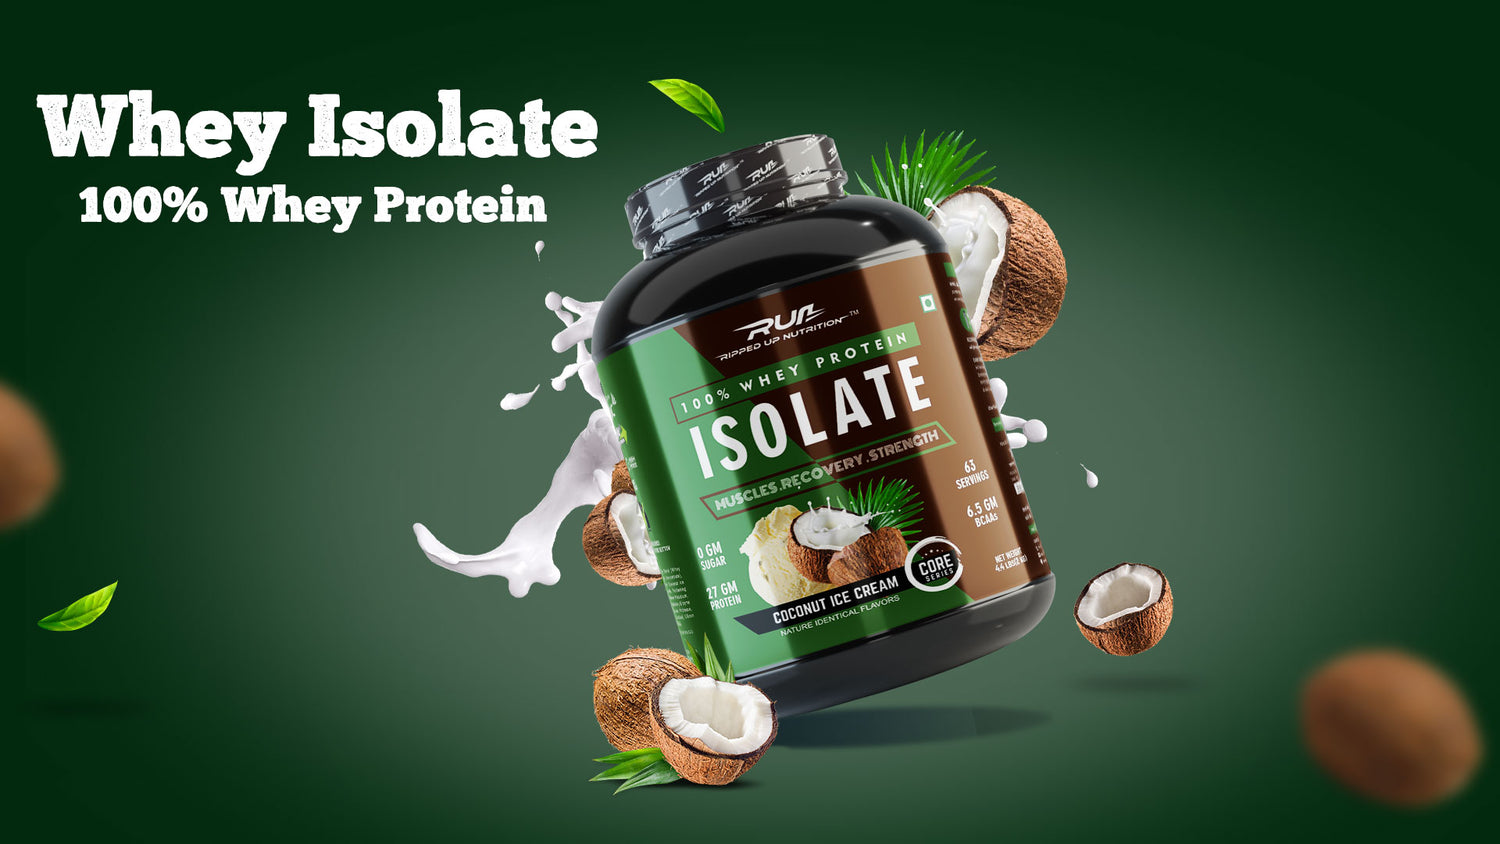 Benefits of Whey Protein Isolate: And Why it is the 'Whey' To Go